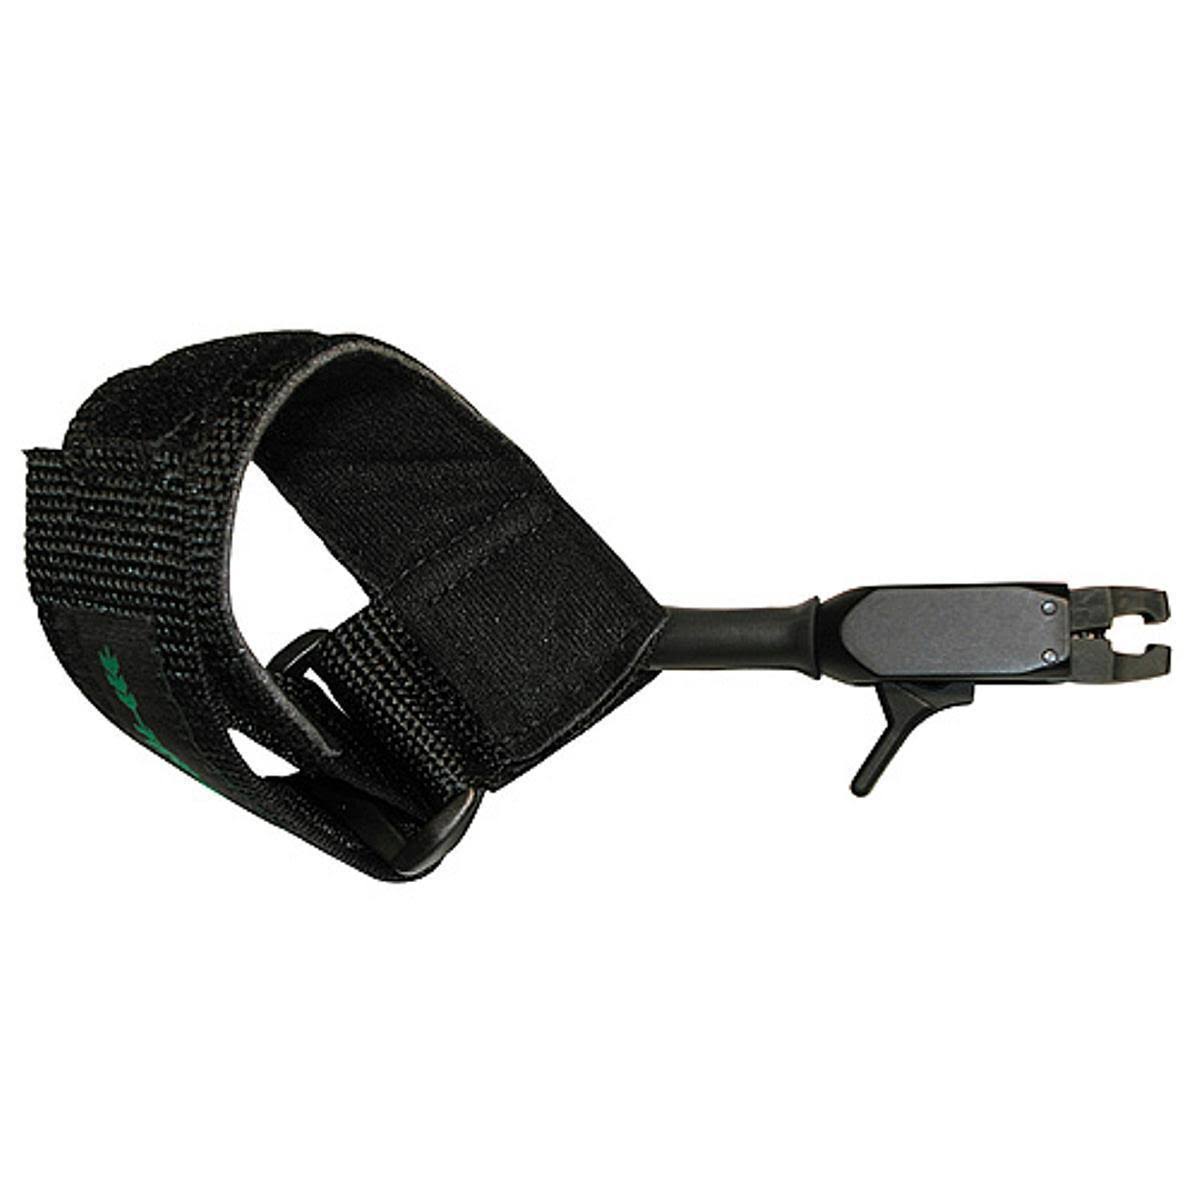 TruFire Patriot Mechanical Compound Bow Release Power Strap